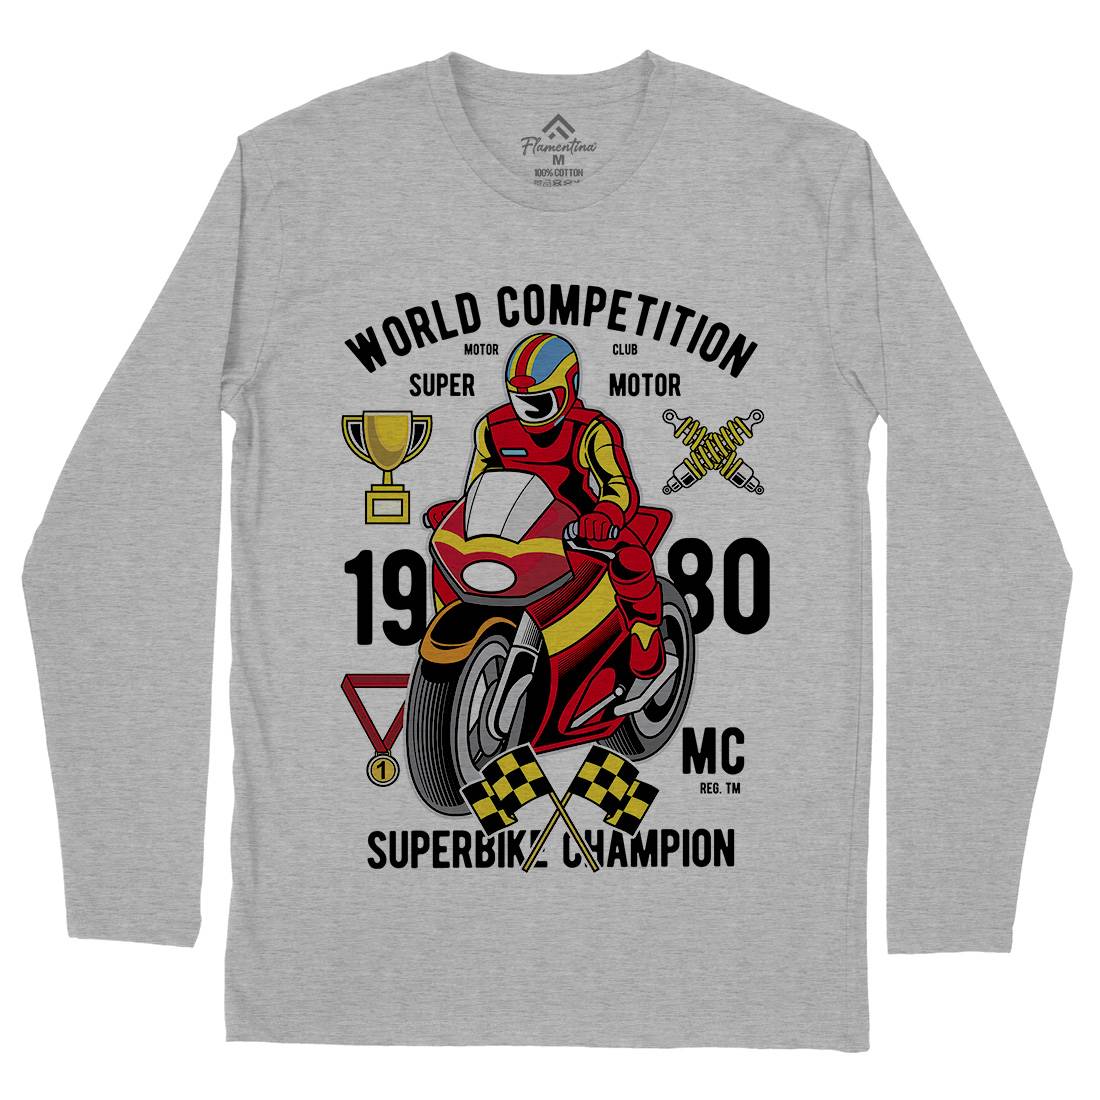 Super Bike World Competition Mens Long Sleeve T-Shirt Motorcycles C458